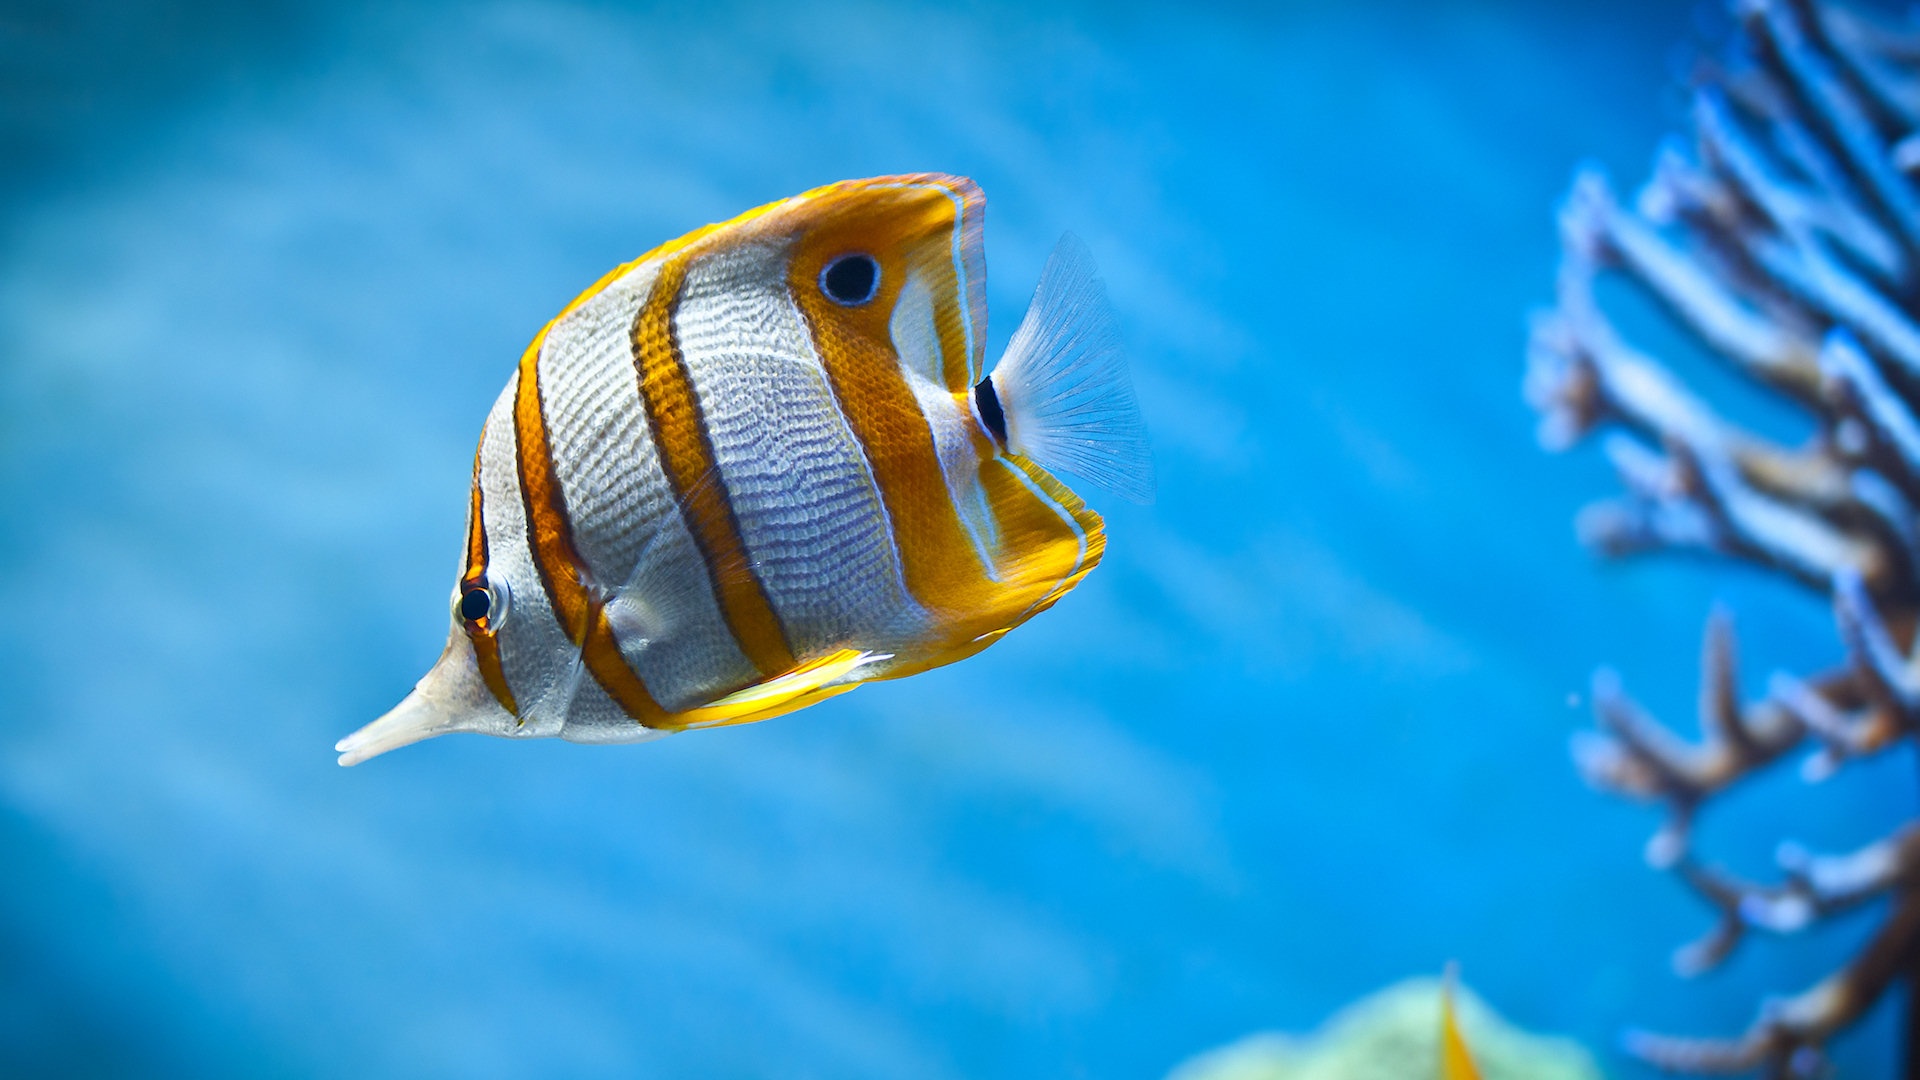 Copper Banded Butterfly Fish - HD Wallpaper 